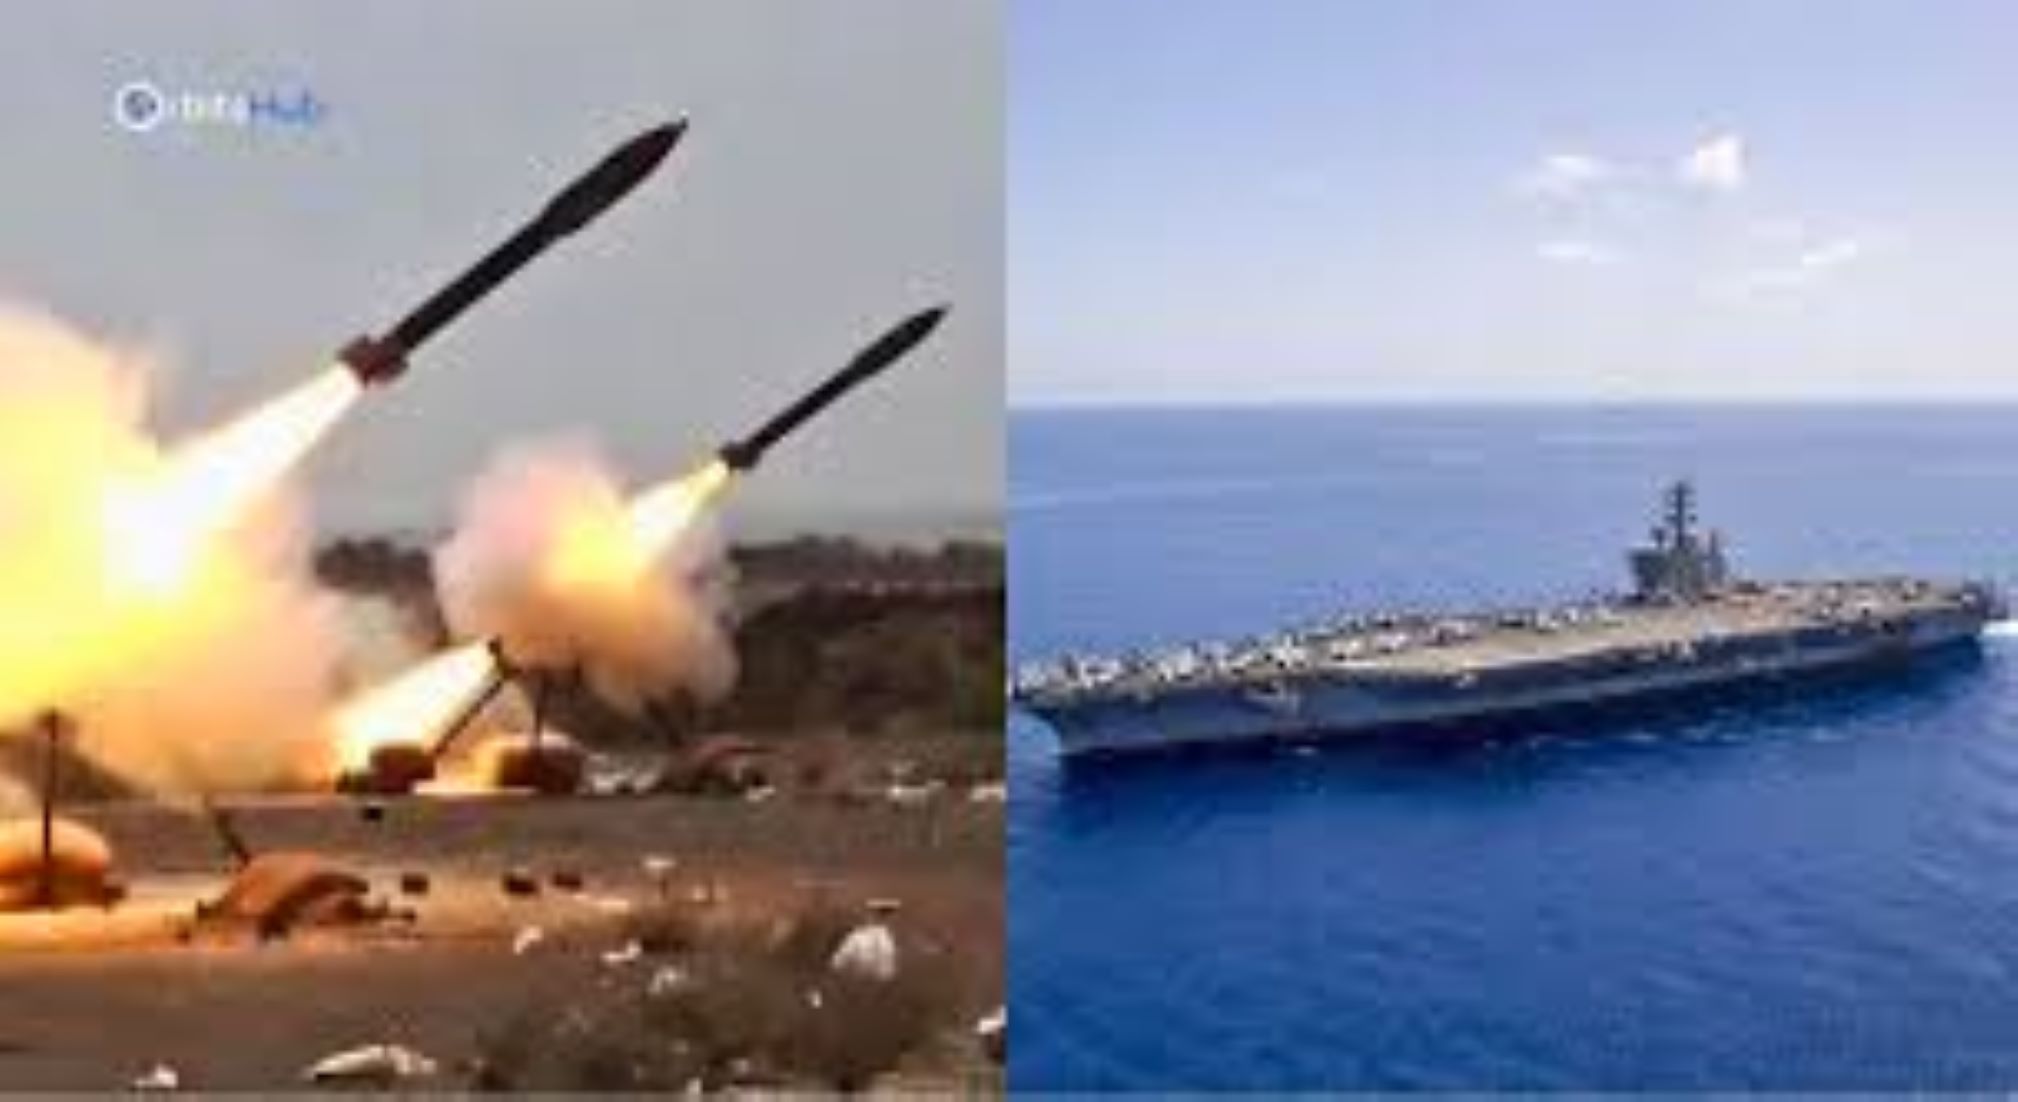 Yemen’s Houthis Launched Ballistic Missiles At U.S. Aircraft Carrier Eisenhower In Red Sea